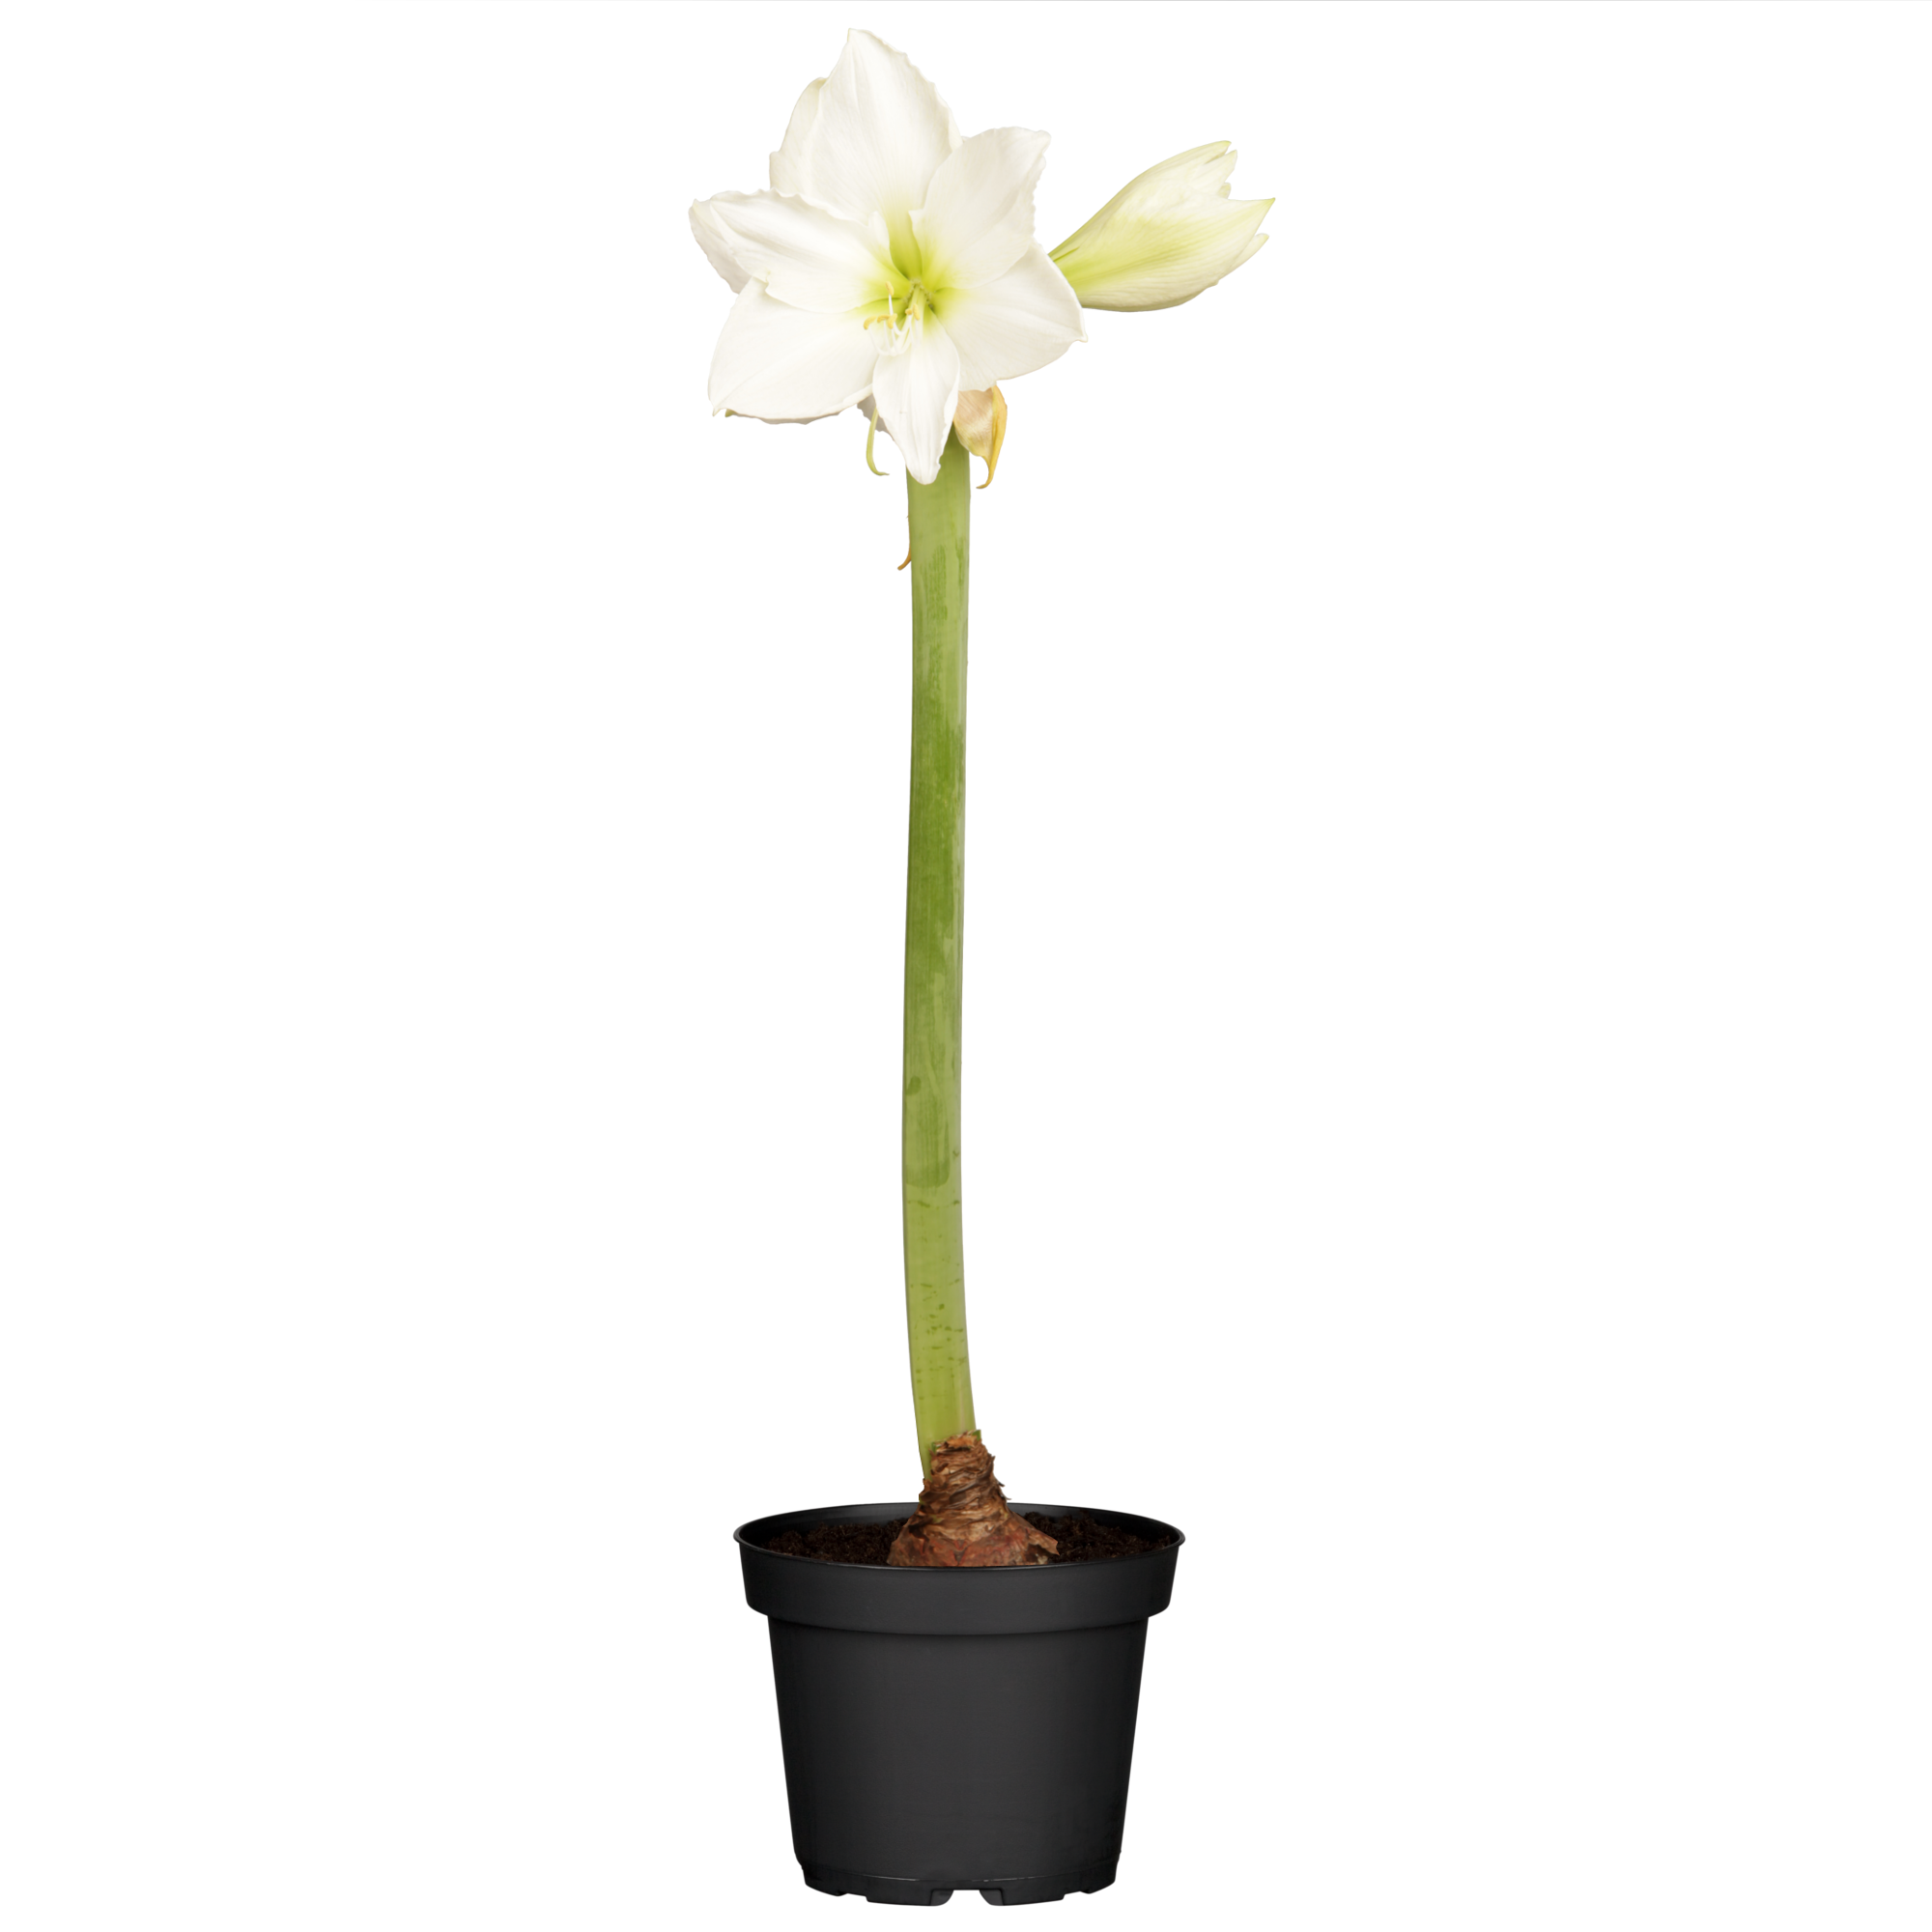 Amaryllis weiß 12 cm Topf + product picture